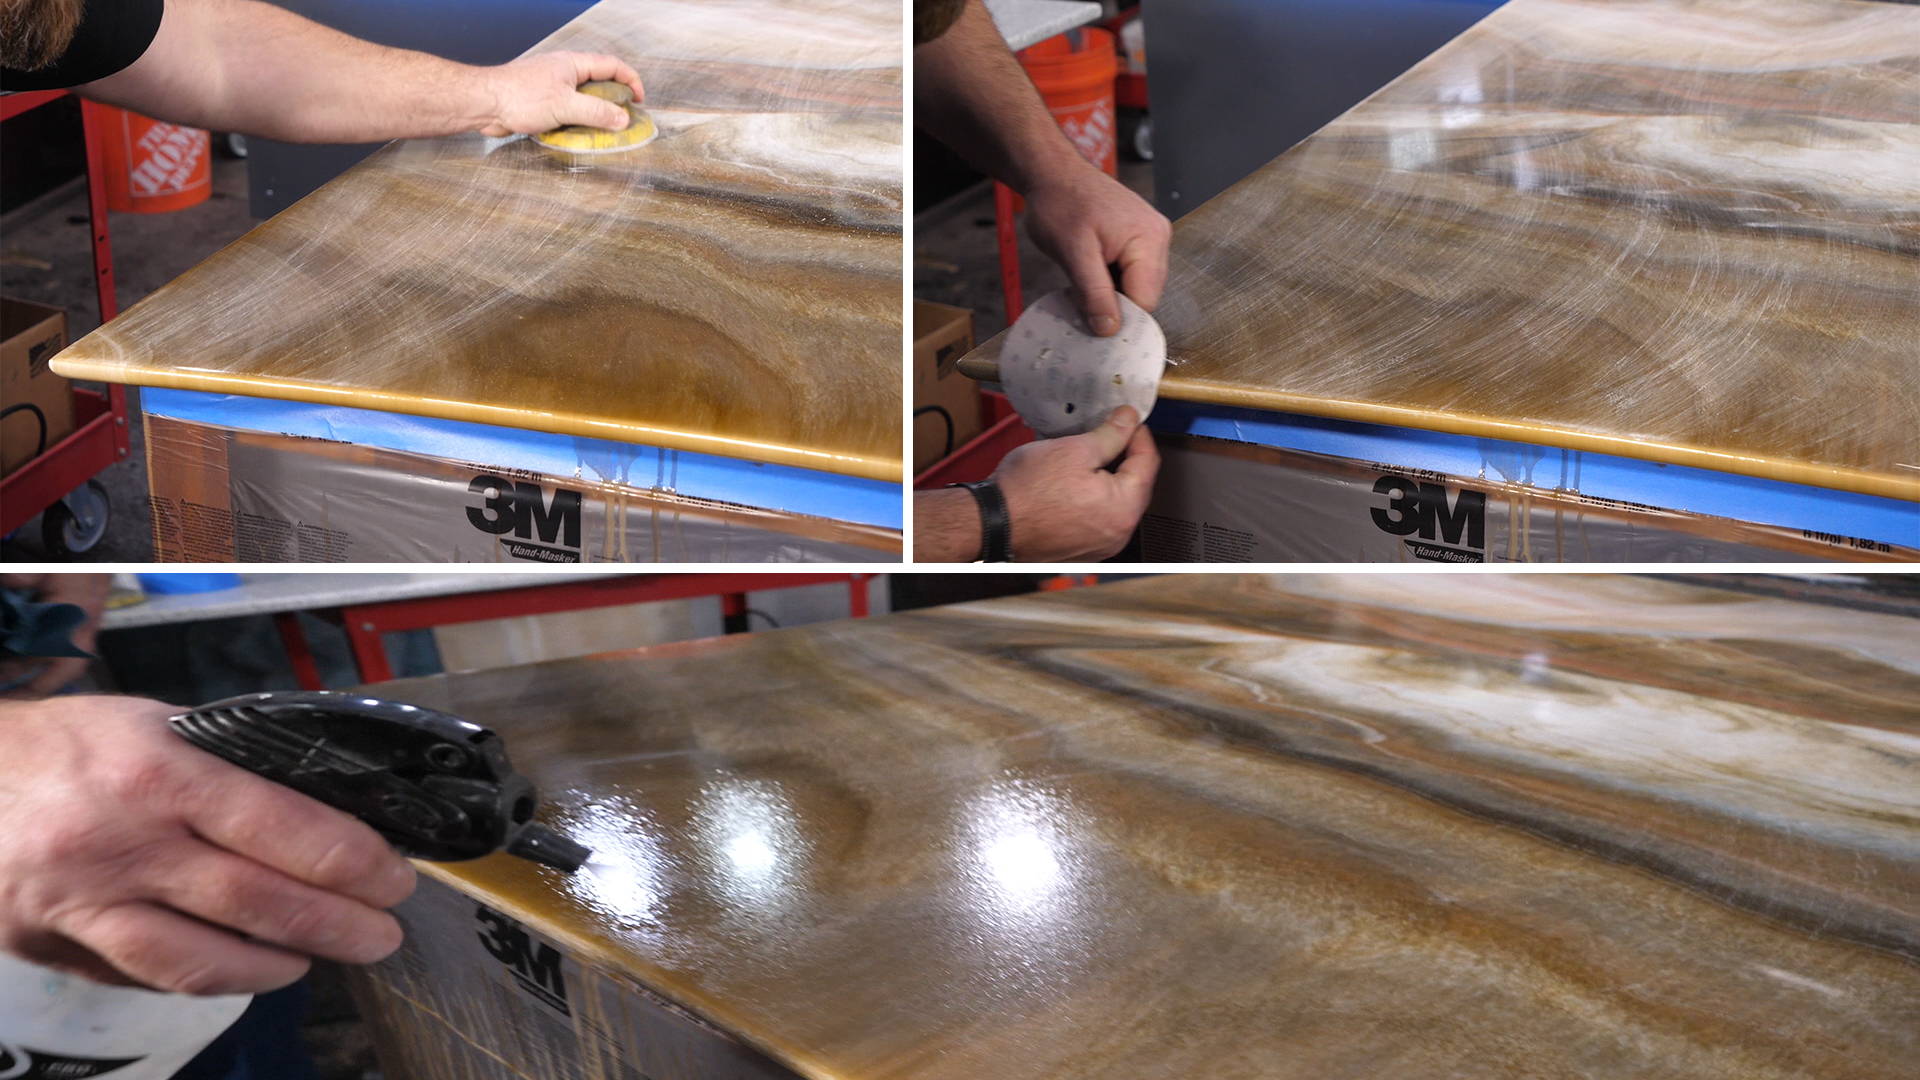 Step 10: Prep for Clear Coat of Epoxy - Lightly sand and clean the surface with isopropyl alcohol after 24-hour cure.